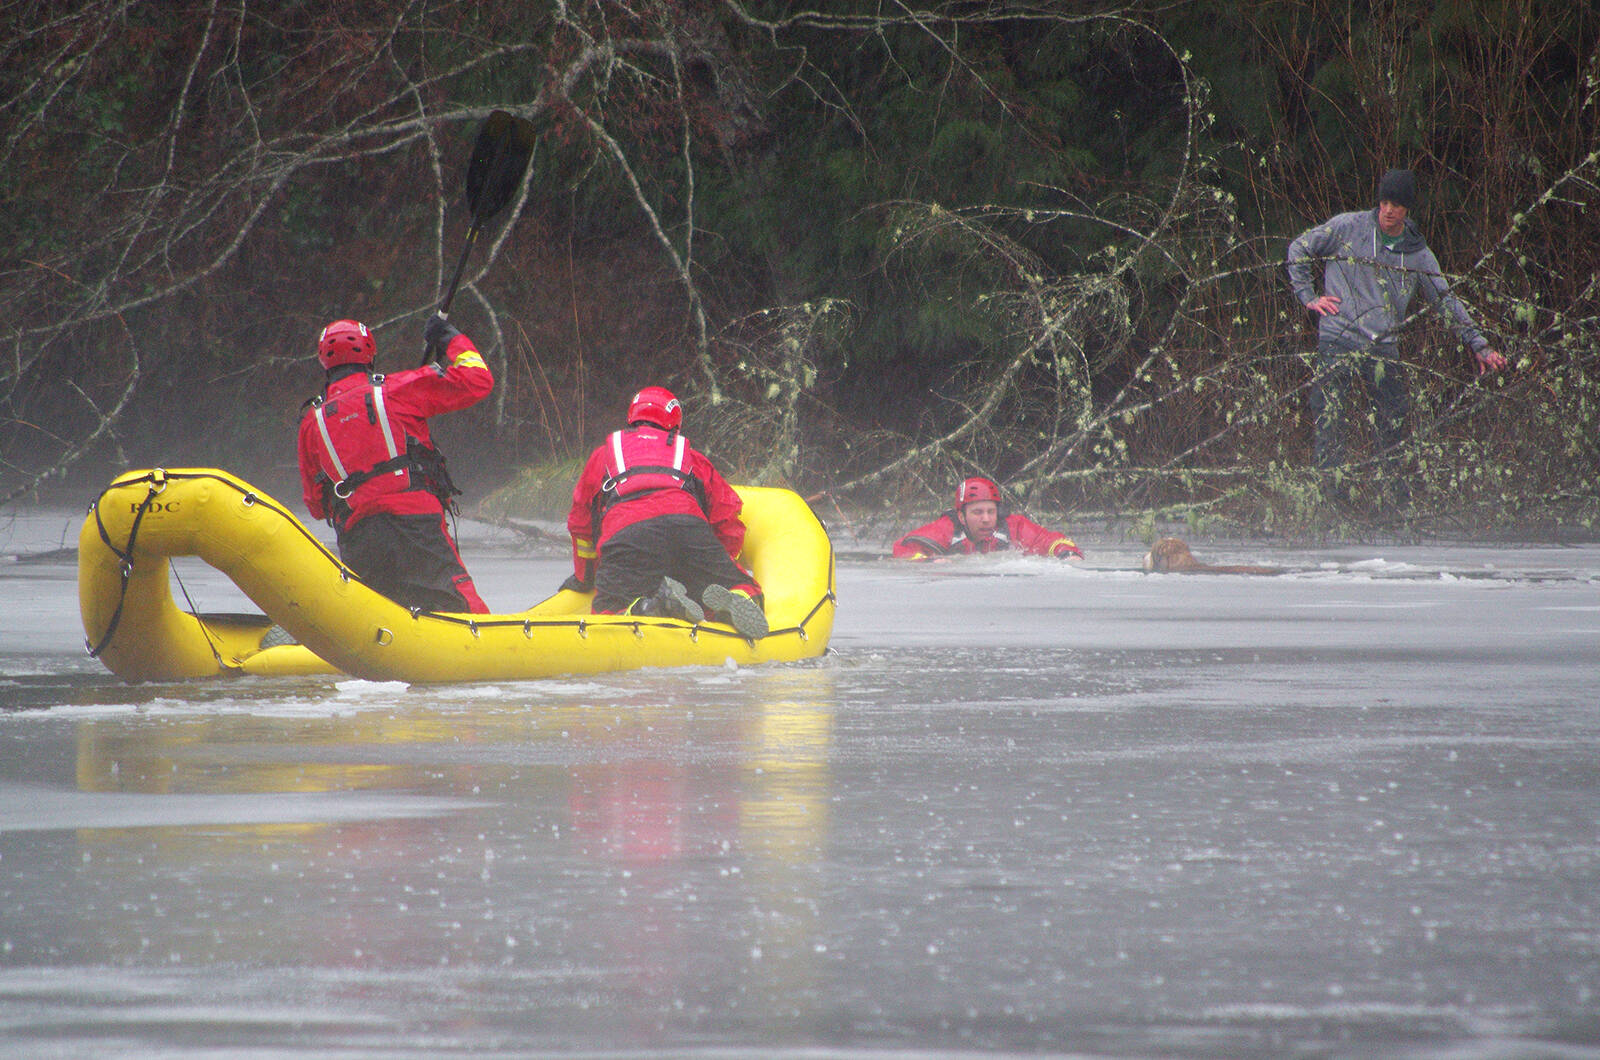 Volunteer firefighters with North Cedar Volunteer Fire Department braved near-freezing waters to save a dog that was seen struggling for its life after falling through ice on Holden Lake in Hemer Park south of Nanaimo. (Chris Bush/News Bulletin)